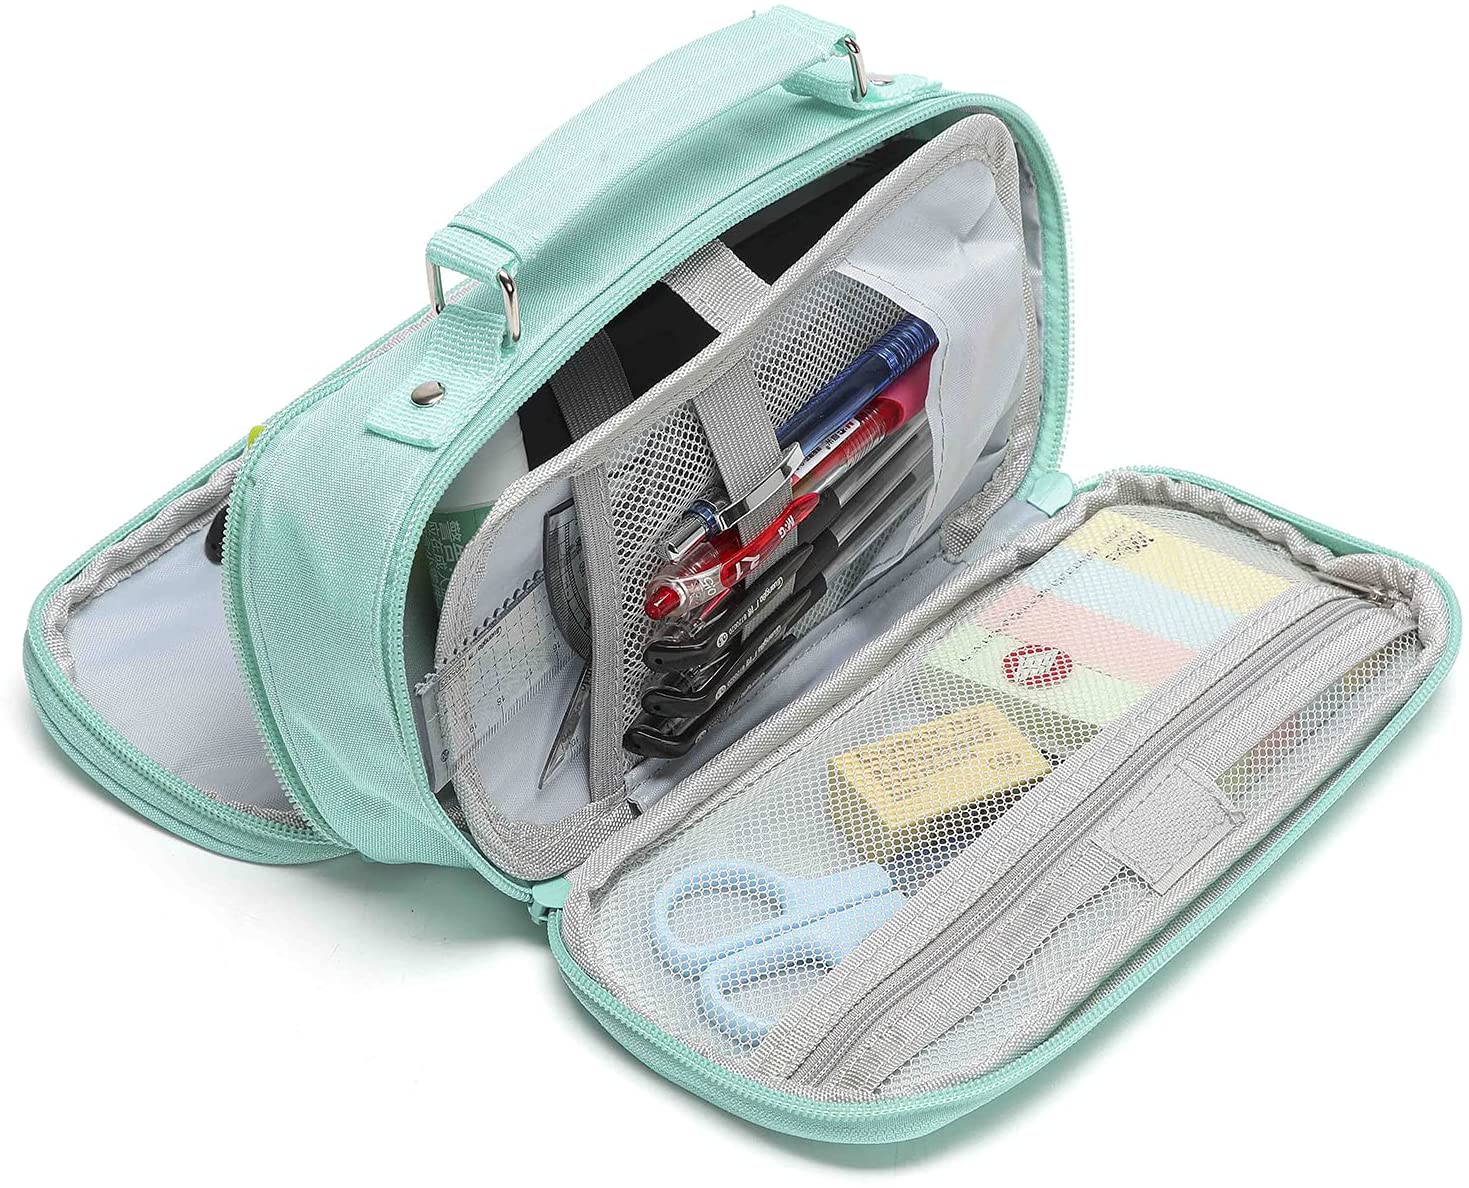 EASTHILL Pencil Case Tray Pencil Pouch with 3 Compartments Stationery